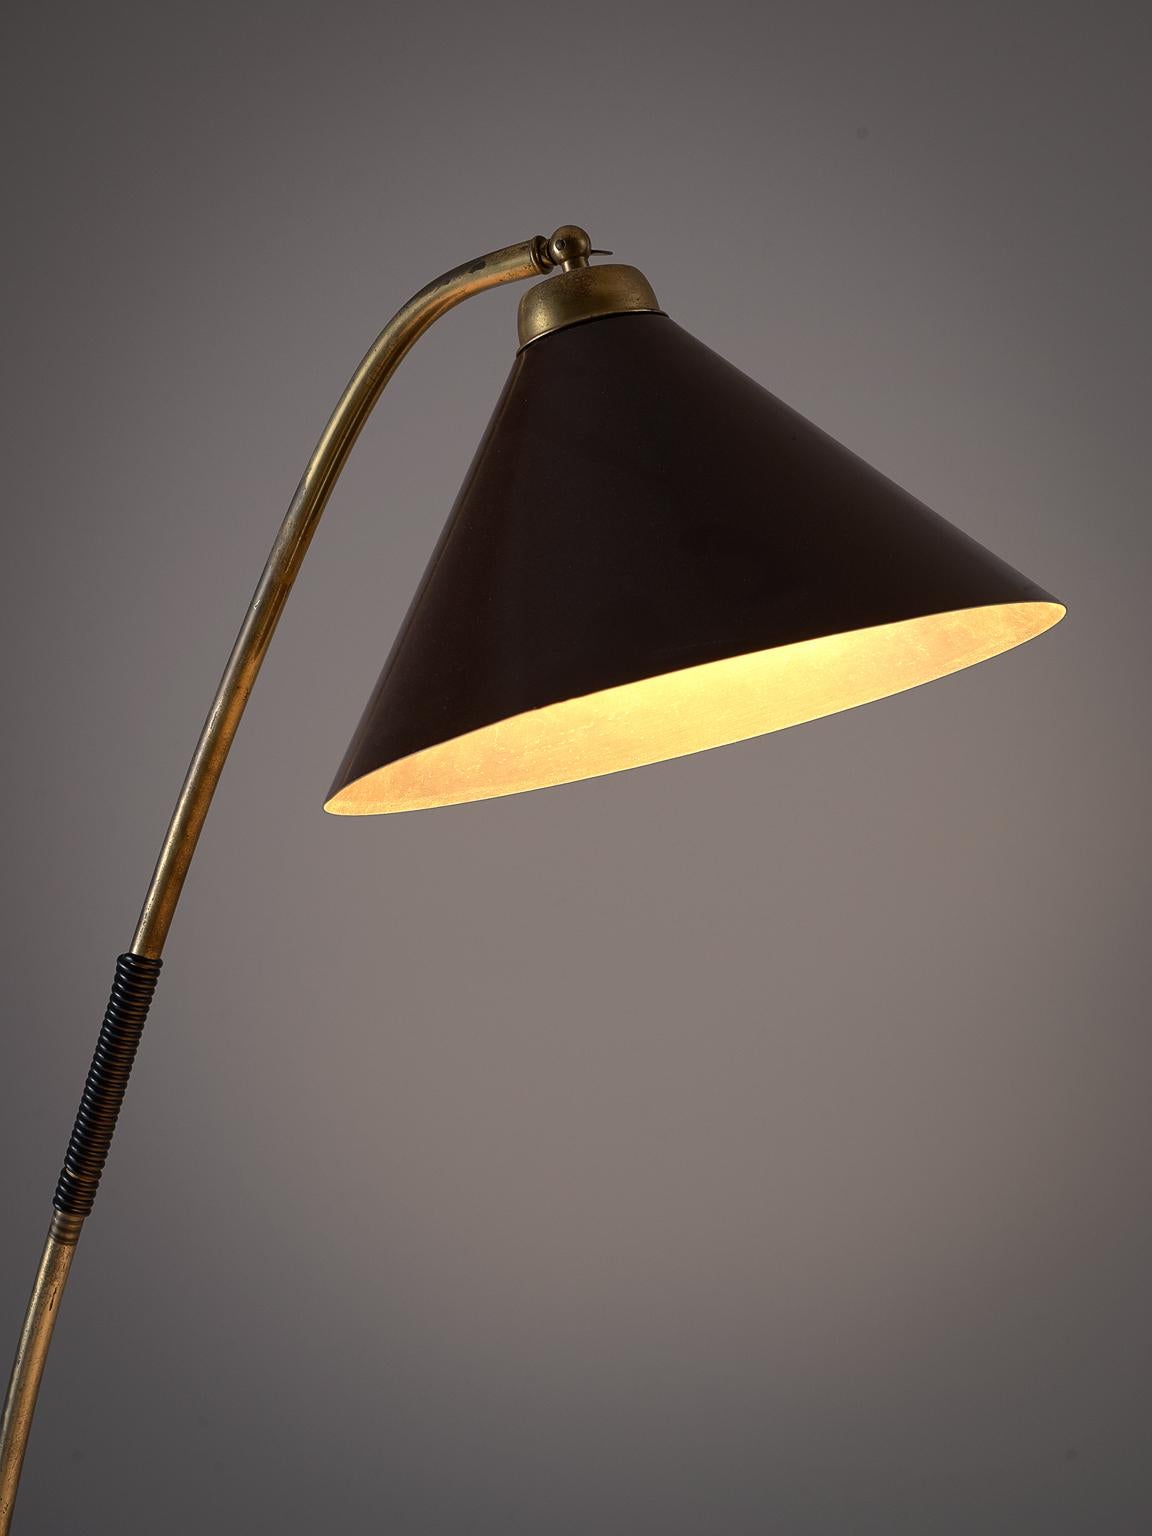 Floor light, in brass and metal, Italy, 1950s. 

Elegant floor light with an elegant brass leg. The brass stern is elegantly shaped and forms the base of the light. The brass foot holds the leg that is attached in a playful way. The shade is built